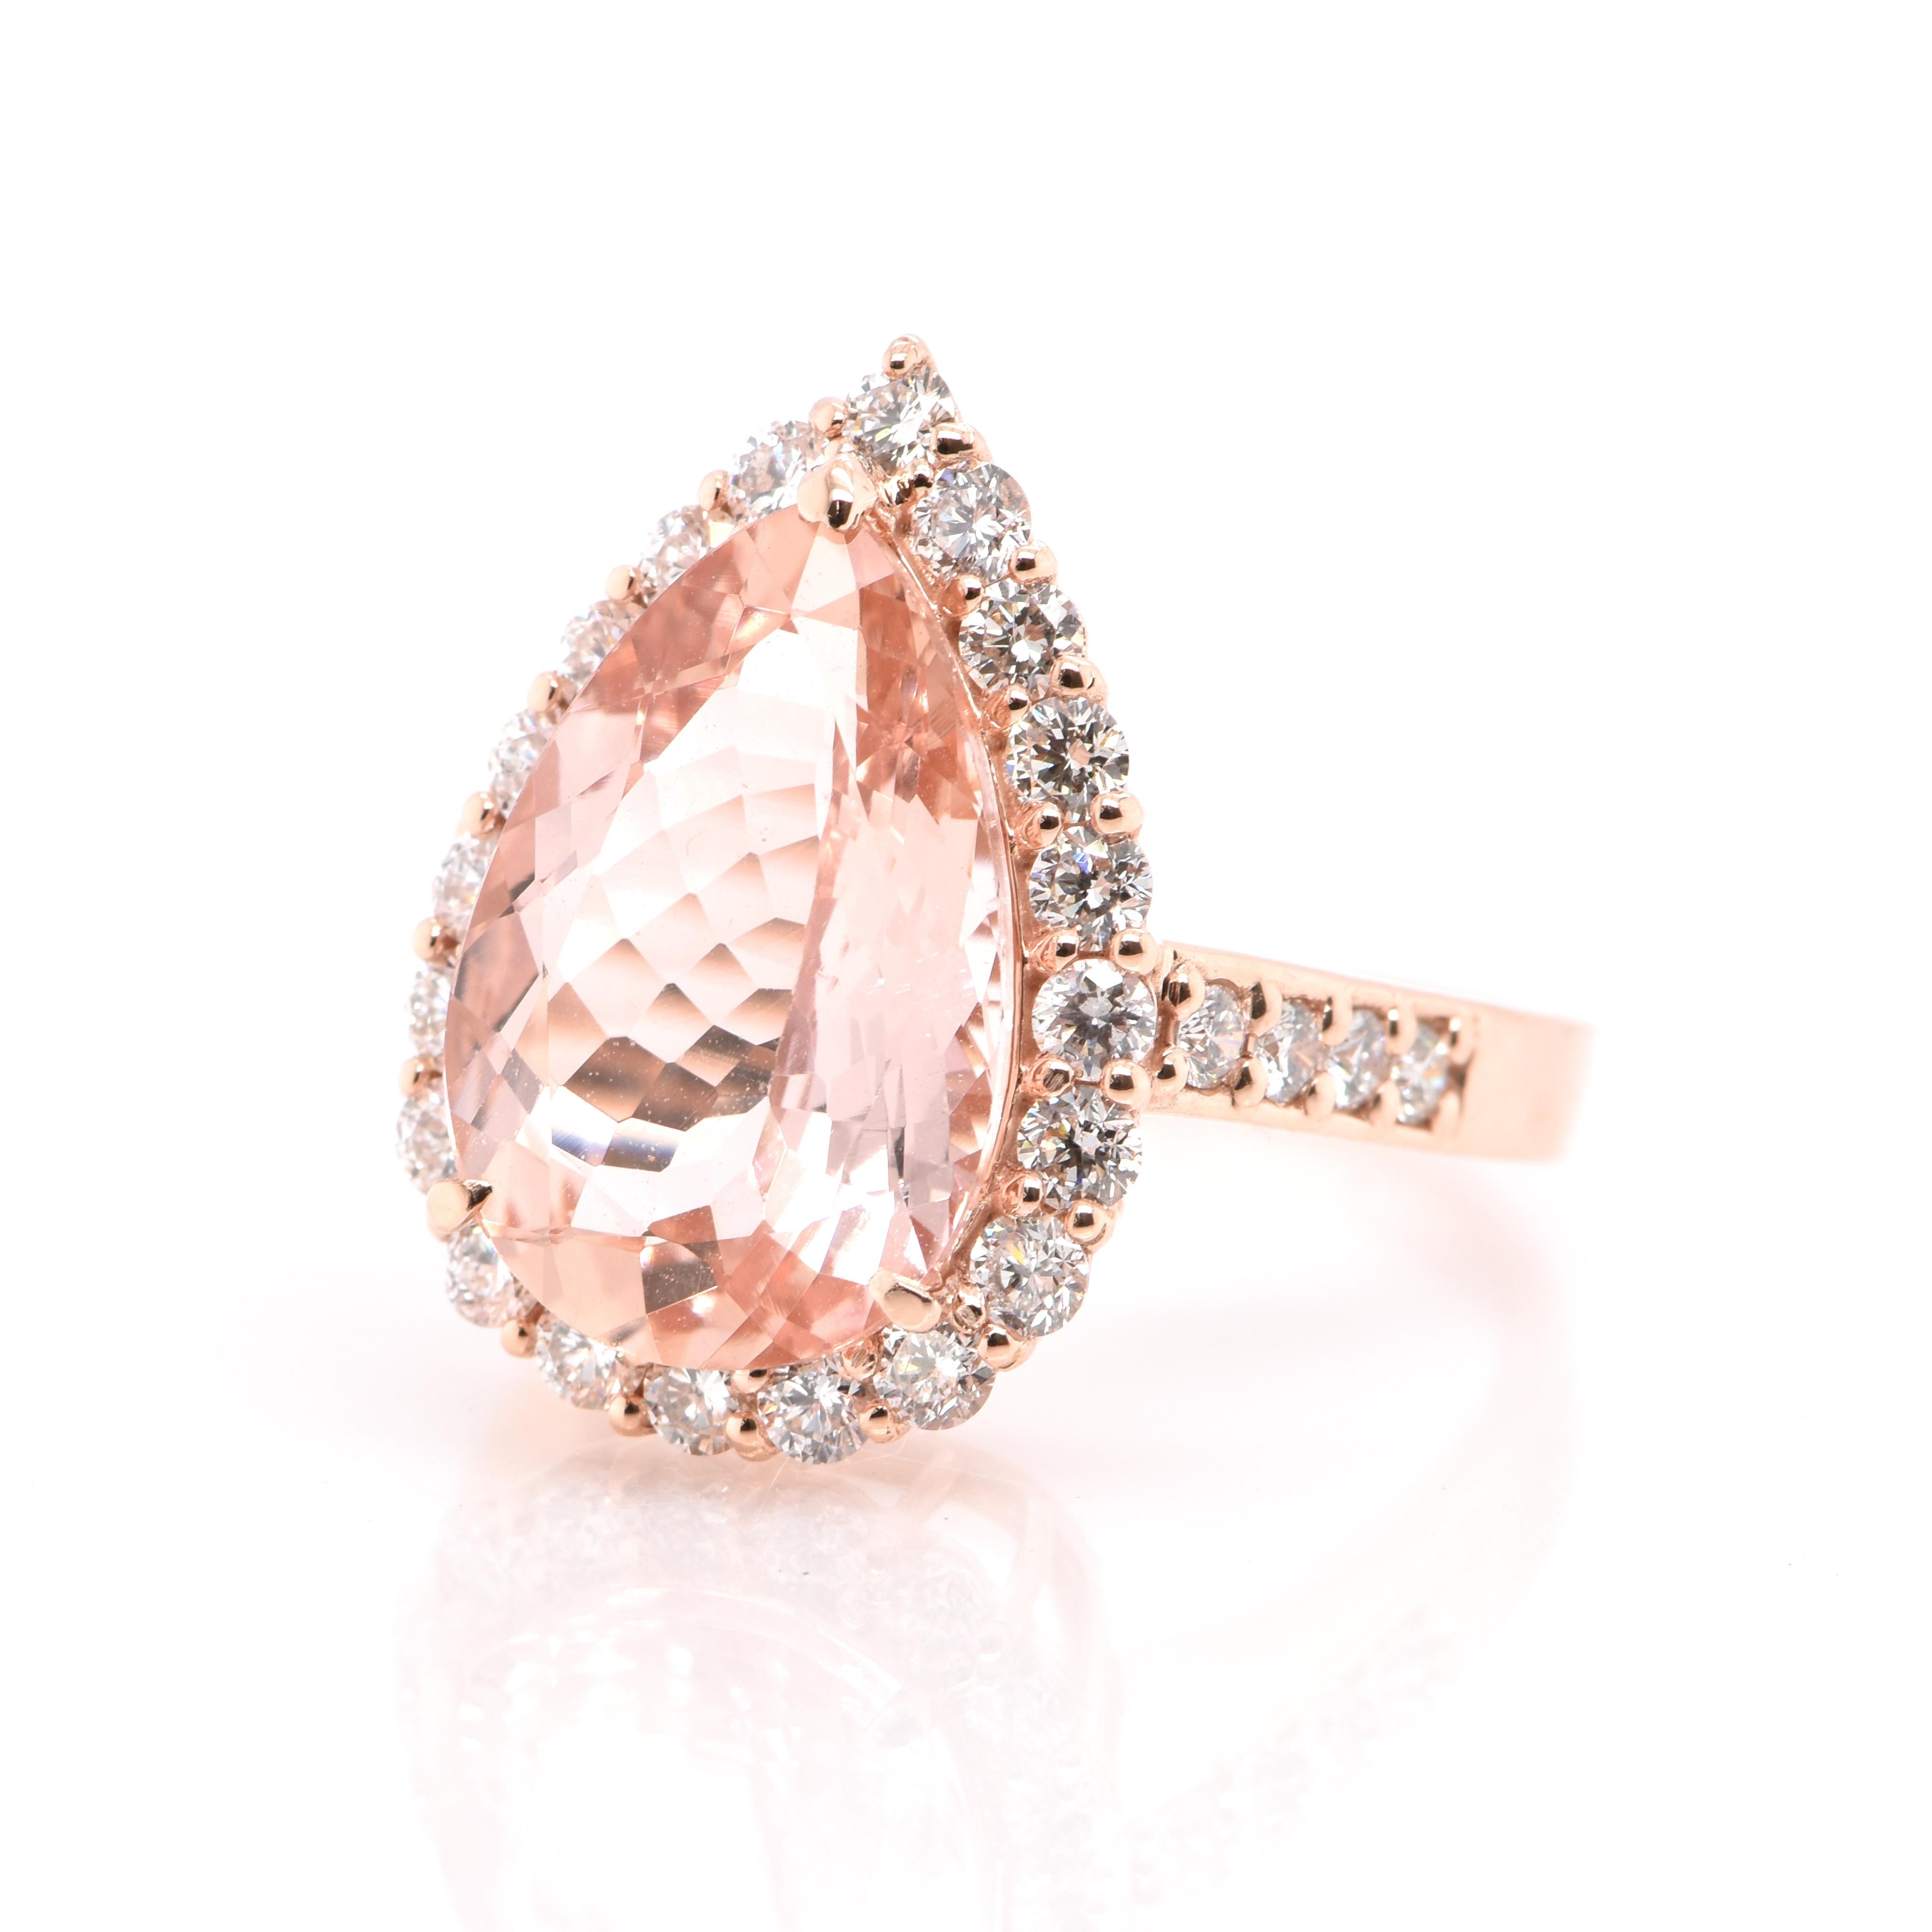 A beautiful Cocktail Ring featuring a 5.16 Carat Natural Morganite (Pink Beryl) and 1.00 Carats of Diamond Accents set in 18 Karat Rose Gold. Having been first discovered in the early 1900s, Morganite was named after the famed banker and gem